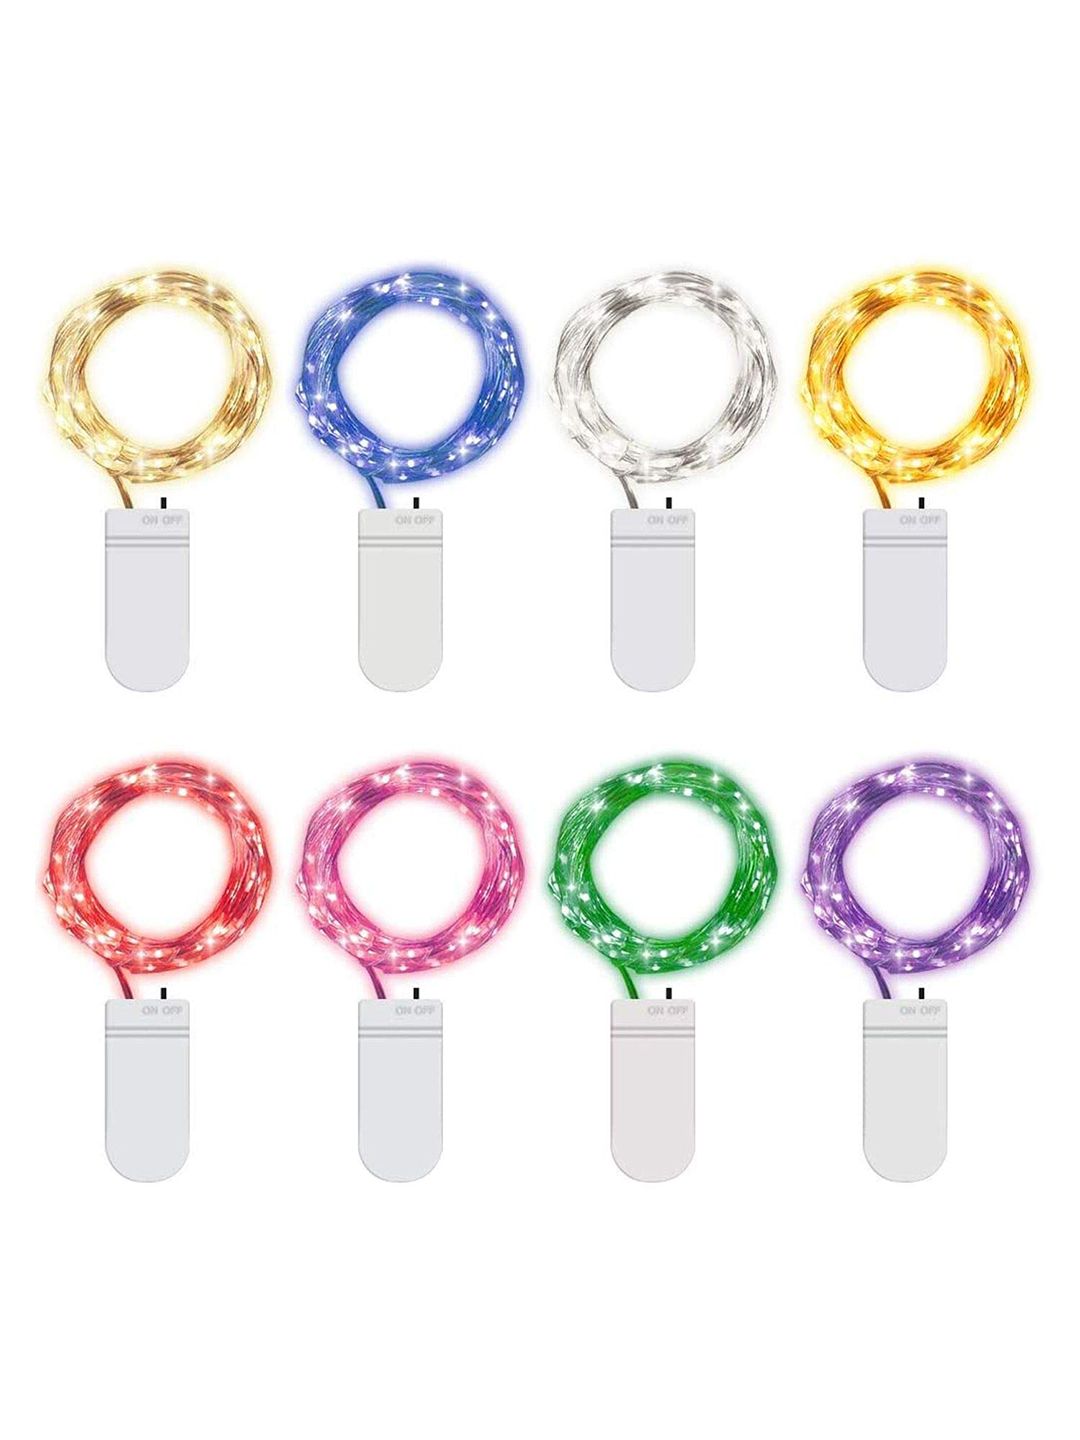 XERGY Multicolored Pack of 8 20 LED 2 m Starry String Battery Powered Fairy Lights Price in India